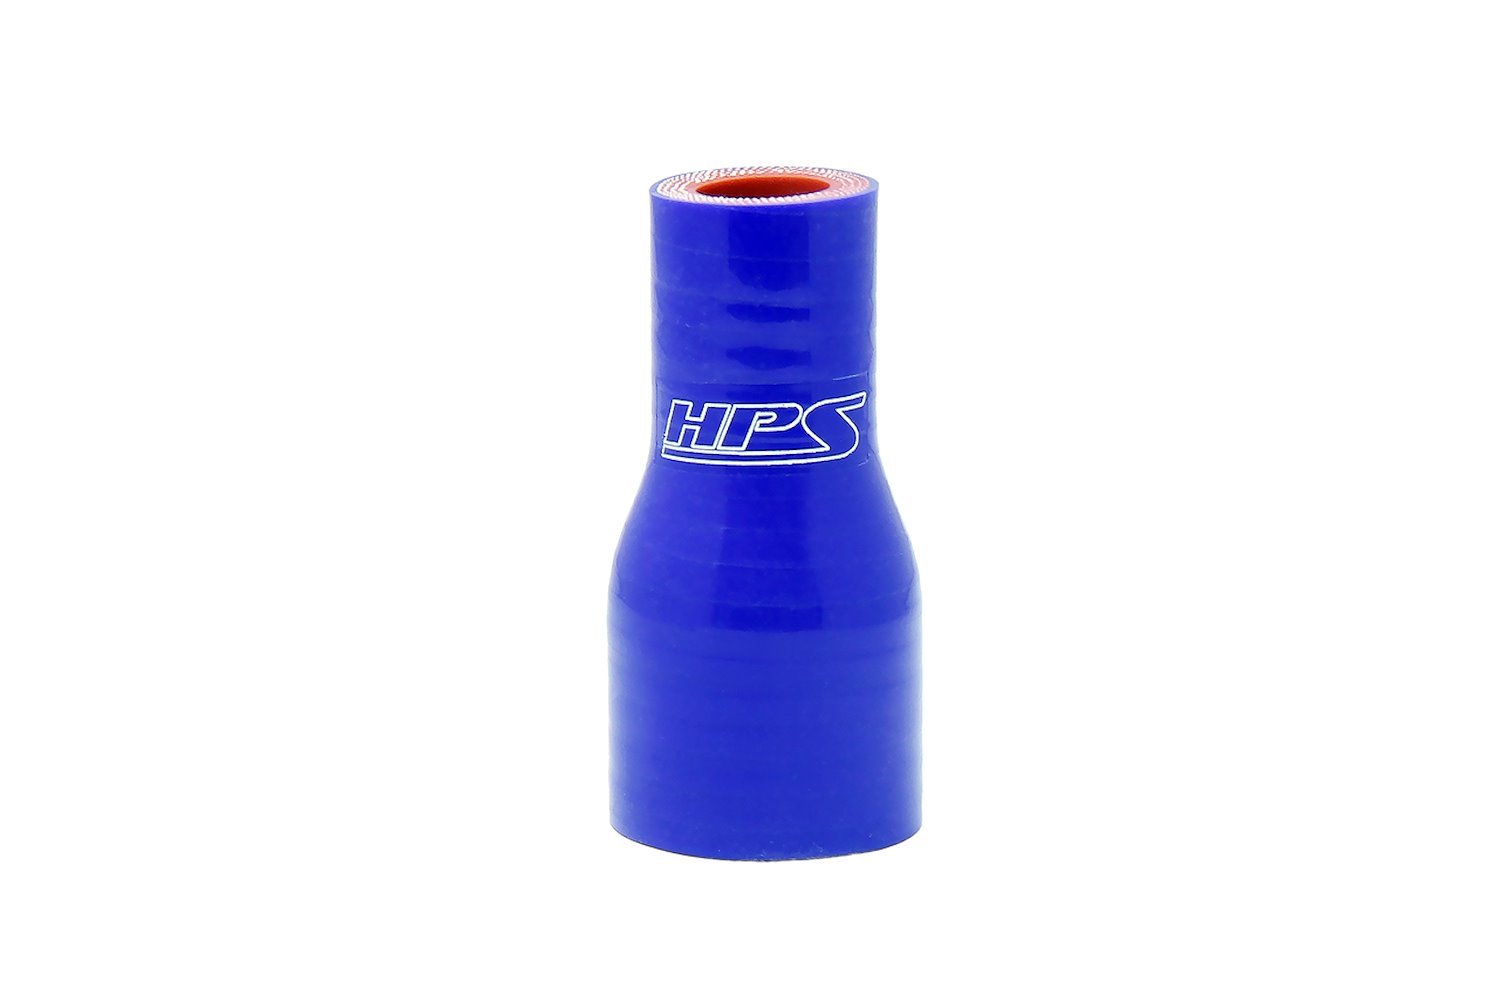 HTSR-125-200-BLUE Silicone Reducer Hose, High-Temp 4-Ply Reinforced, 1-1/4 in. - 2 in. ID, 3 in. Long, Blue